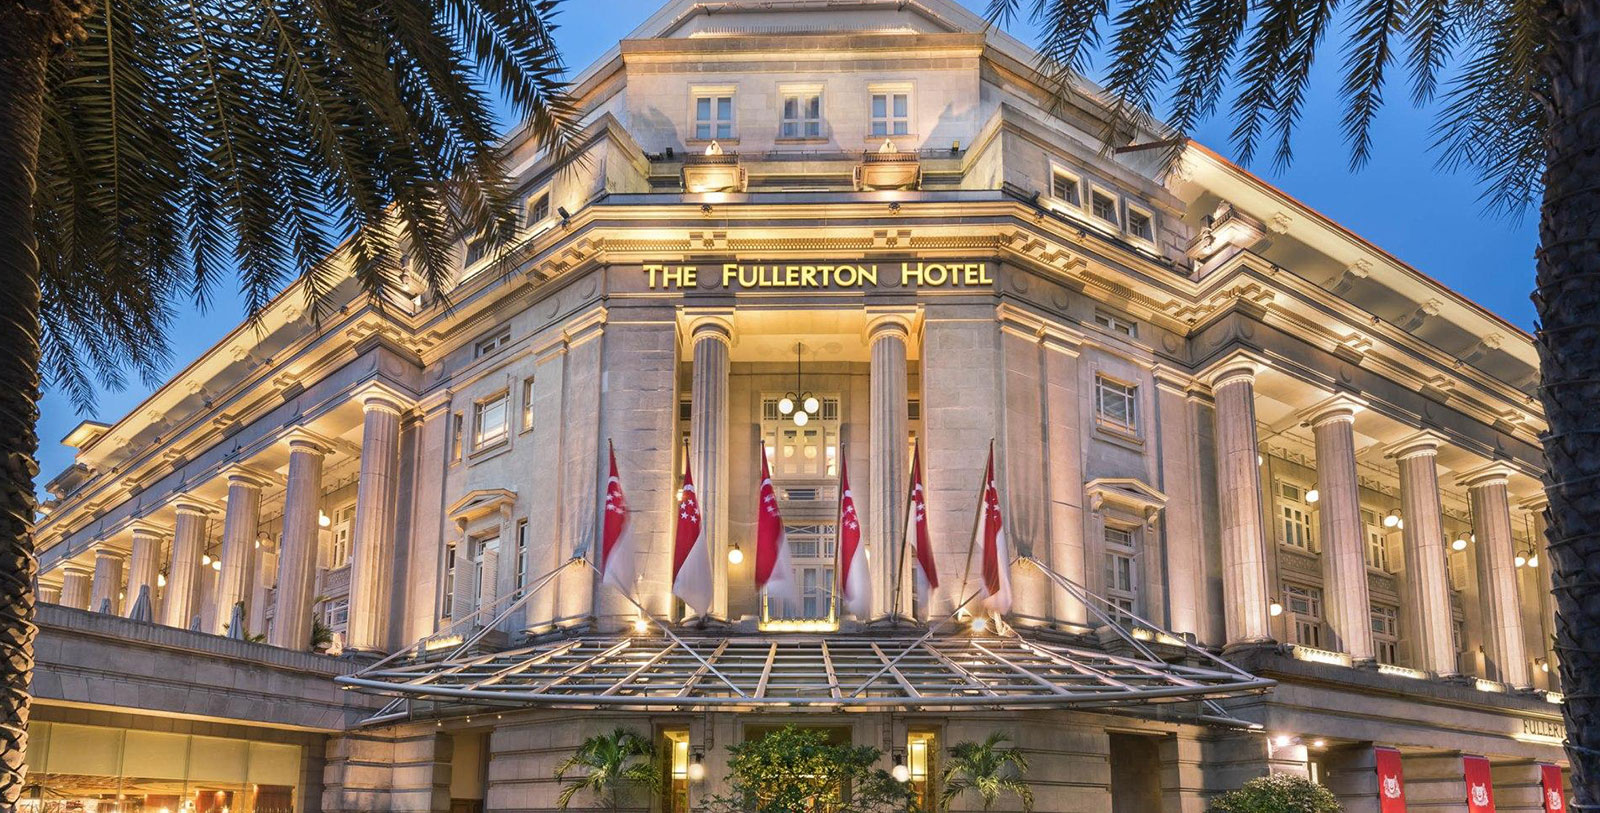 Discover the amazing historical character of The Fullerton Hotel Singapore.